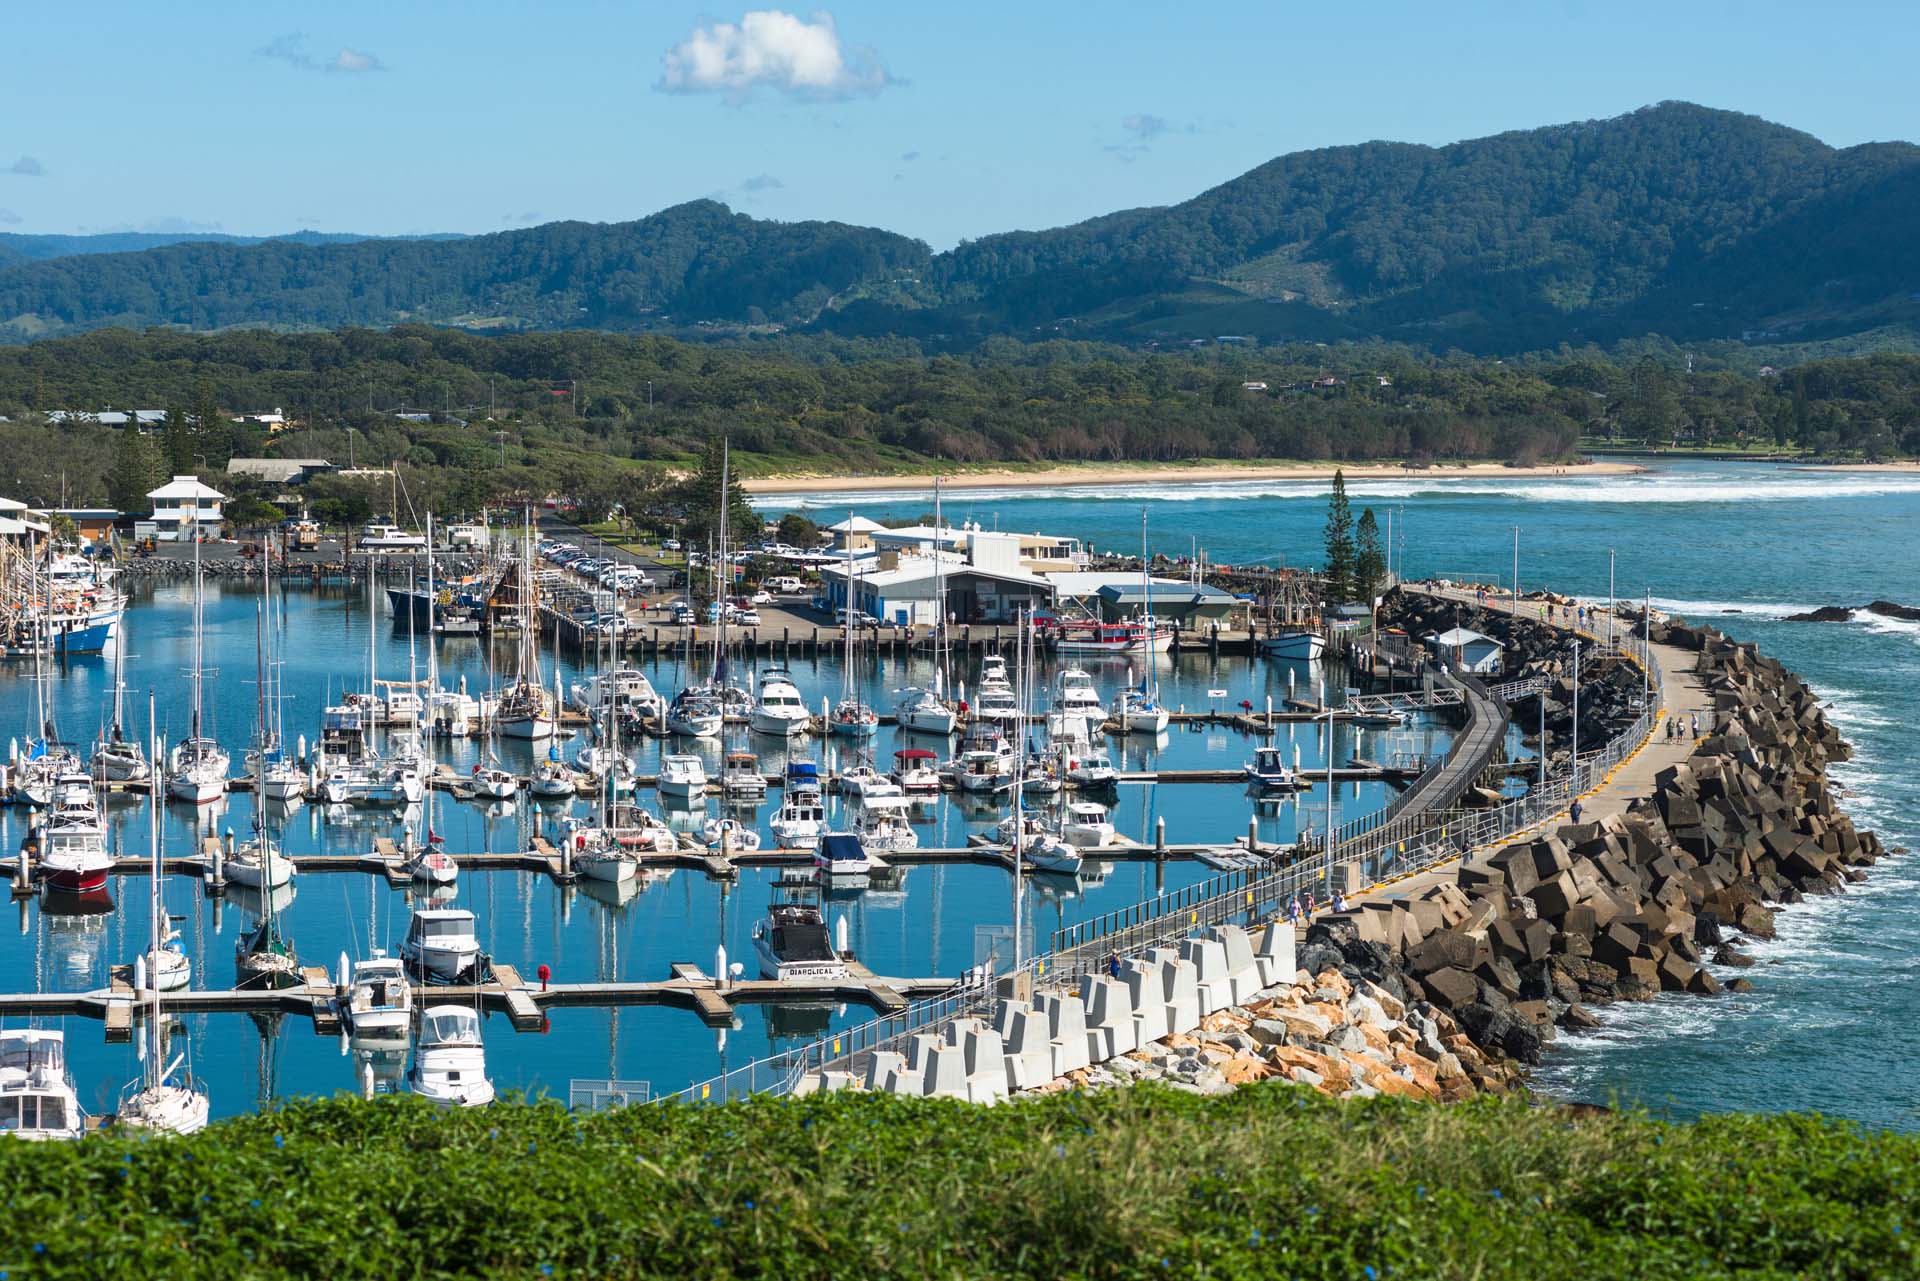 A view over the seaside city of Coff's Harbour, Australia, packed with yachts and pleasure craft with wooded hills in the background.